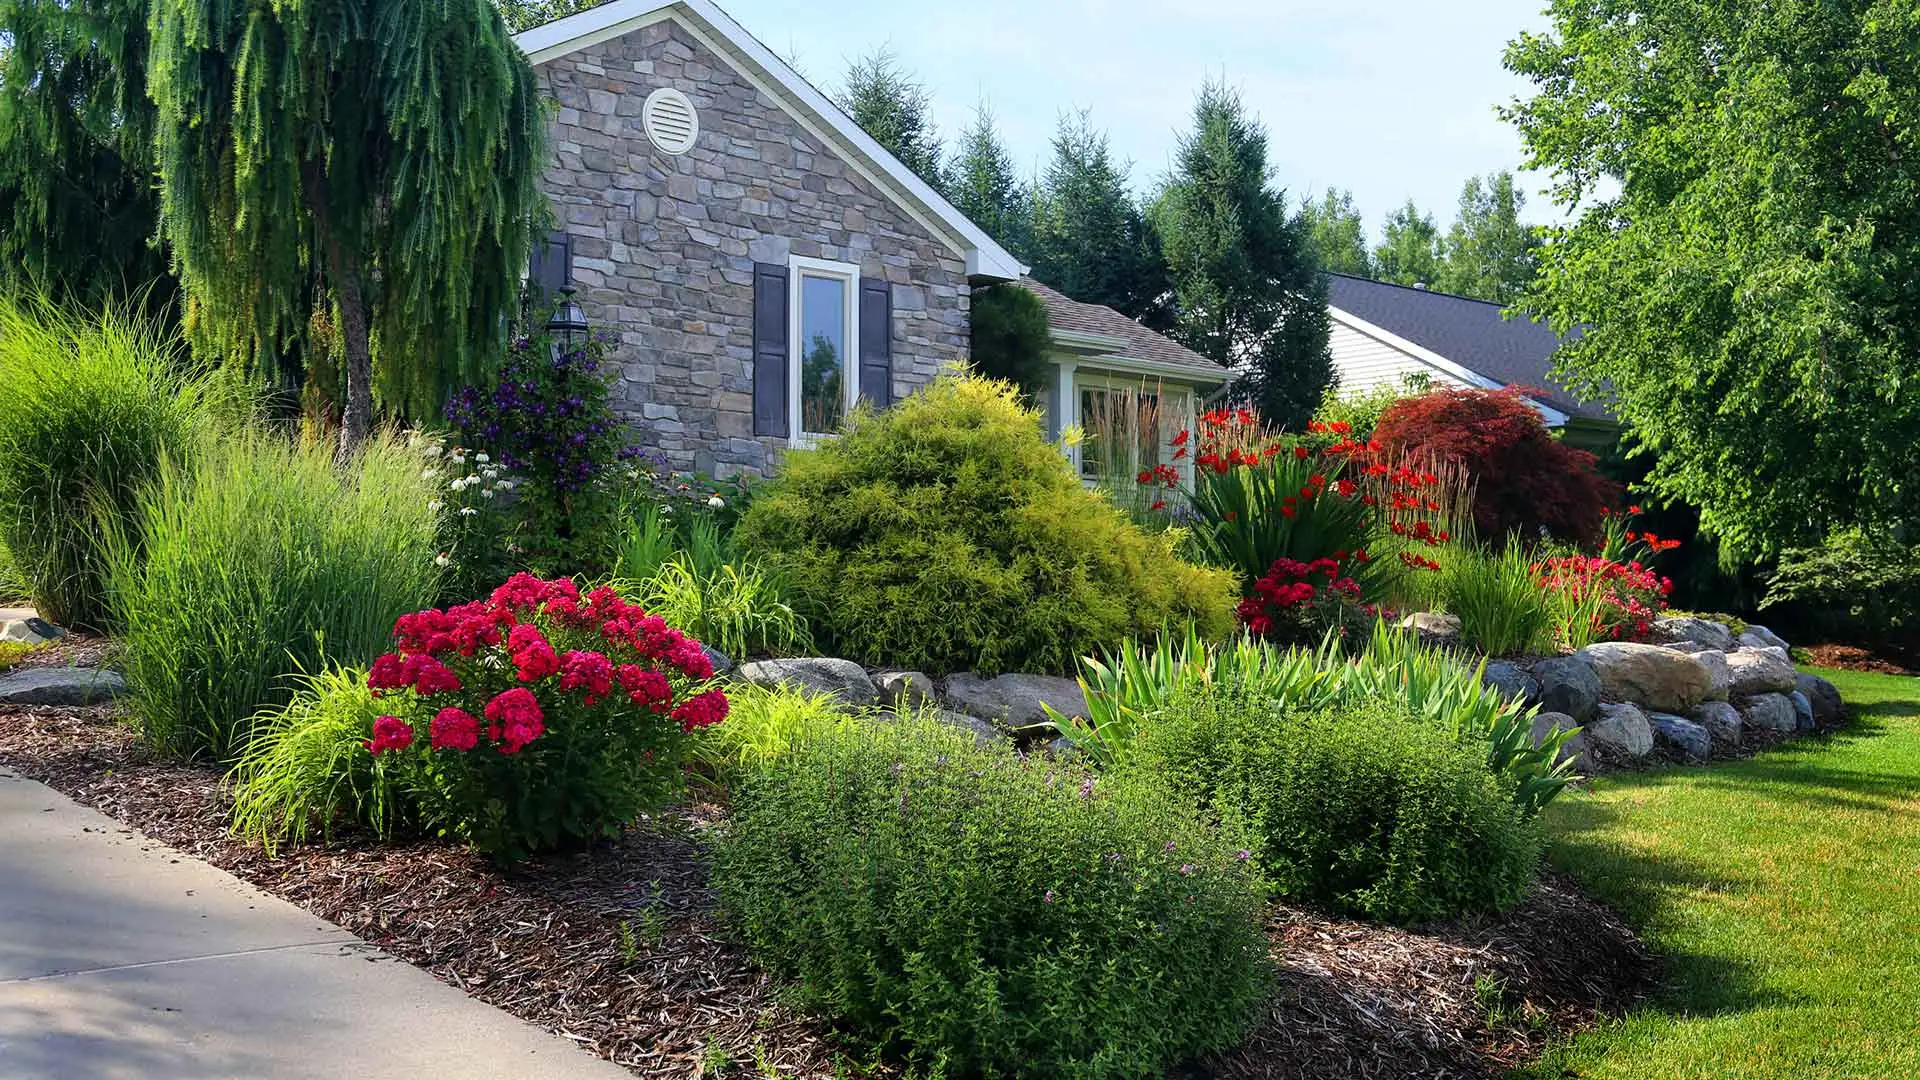 Lush home landscaping at a property in Okemos, MI.